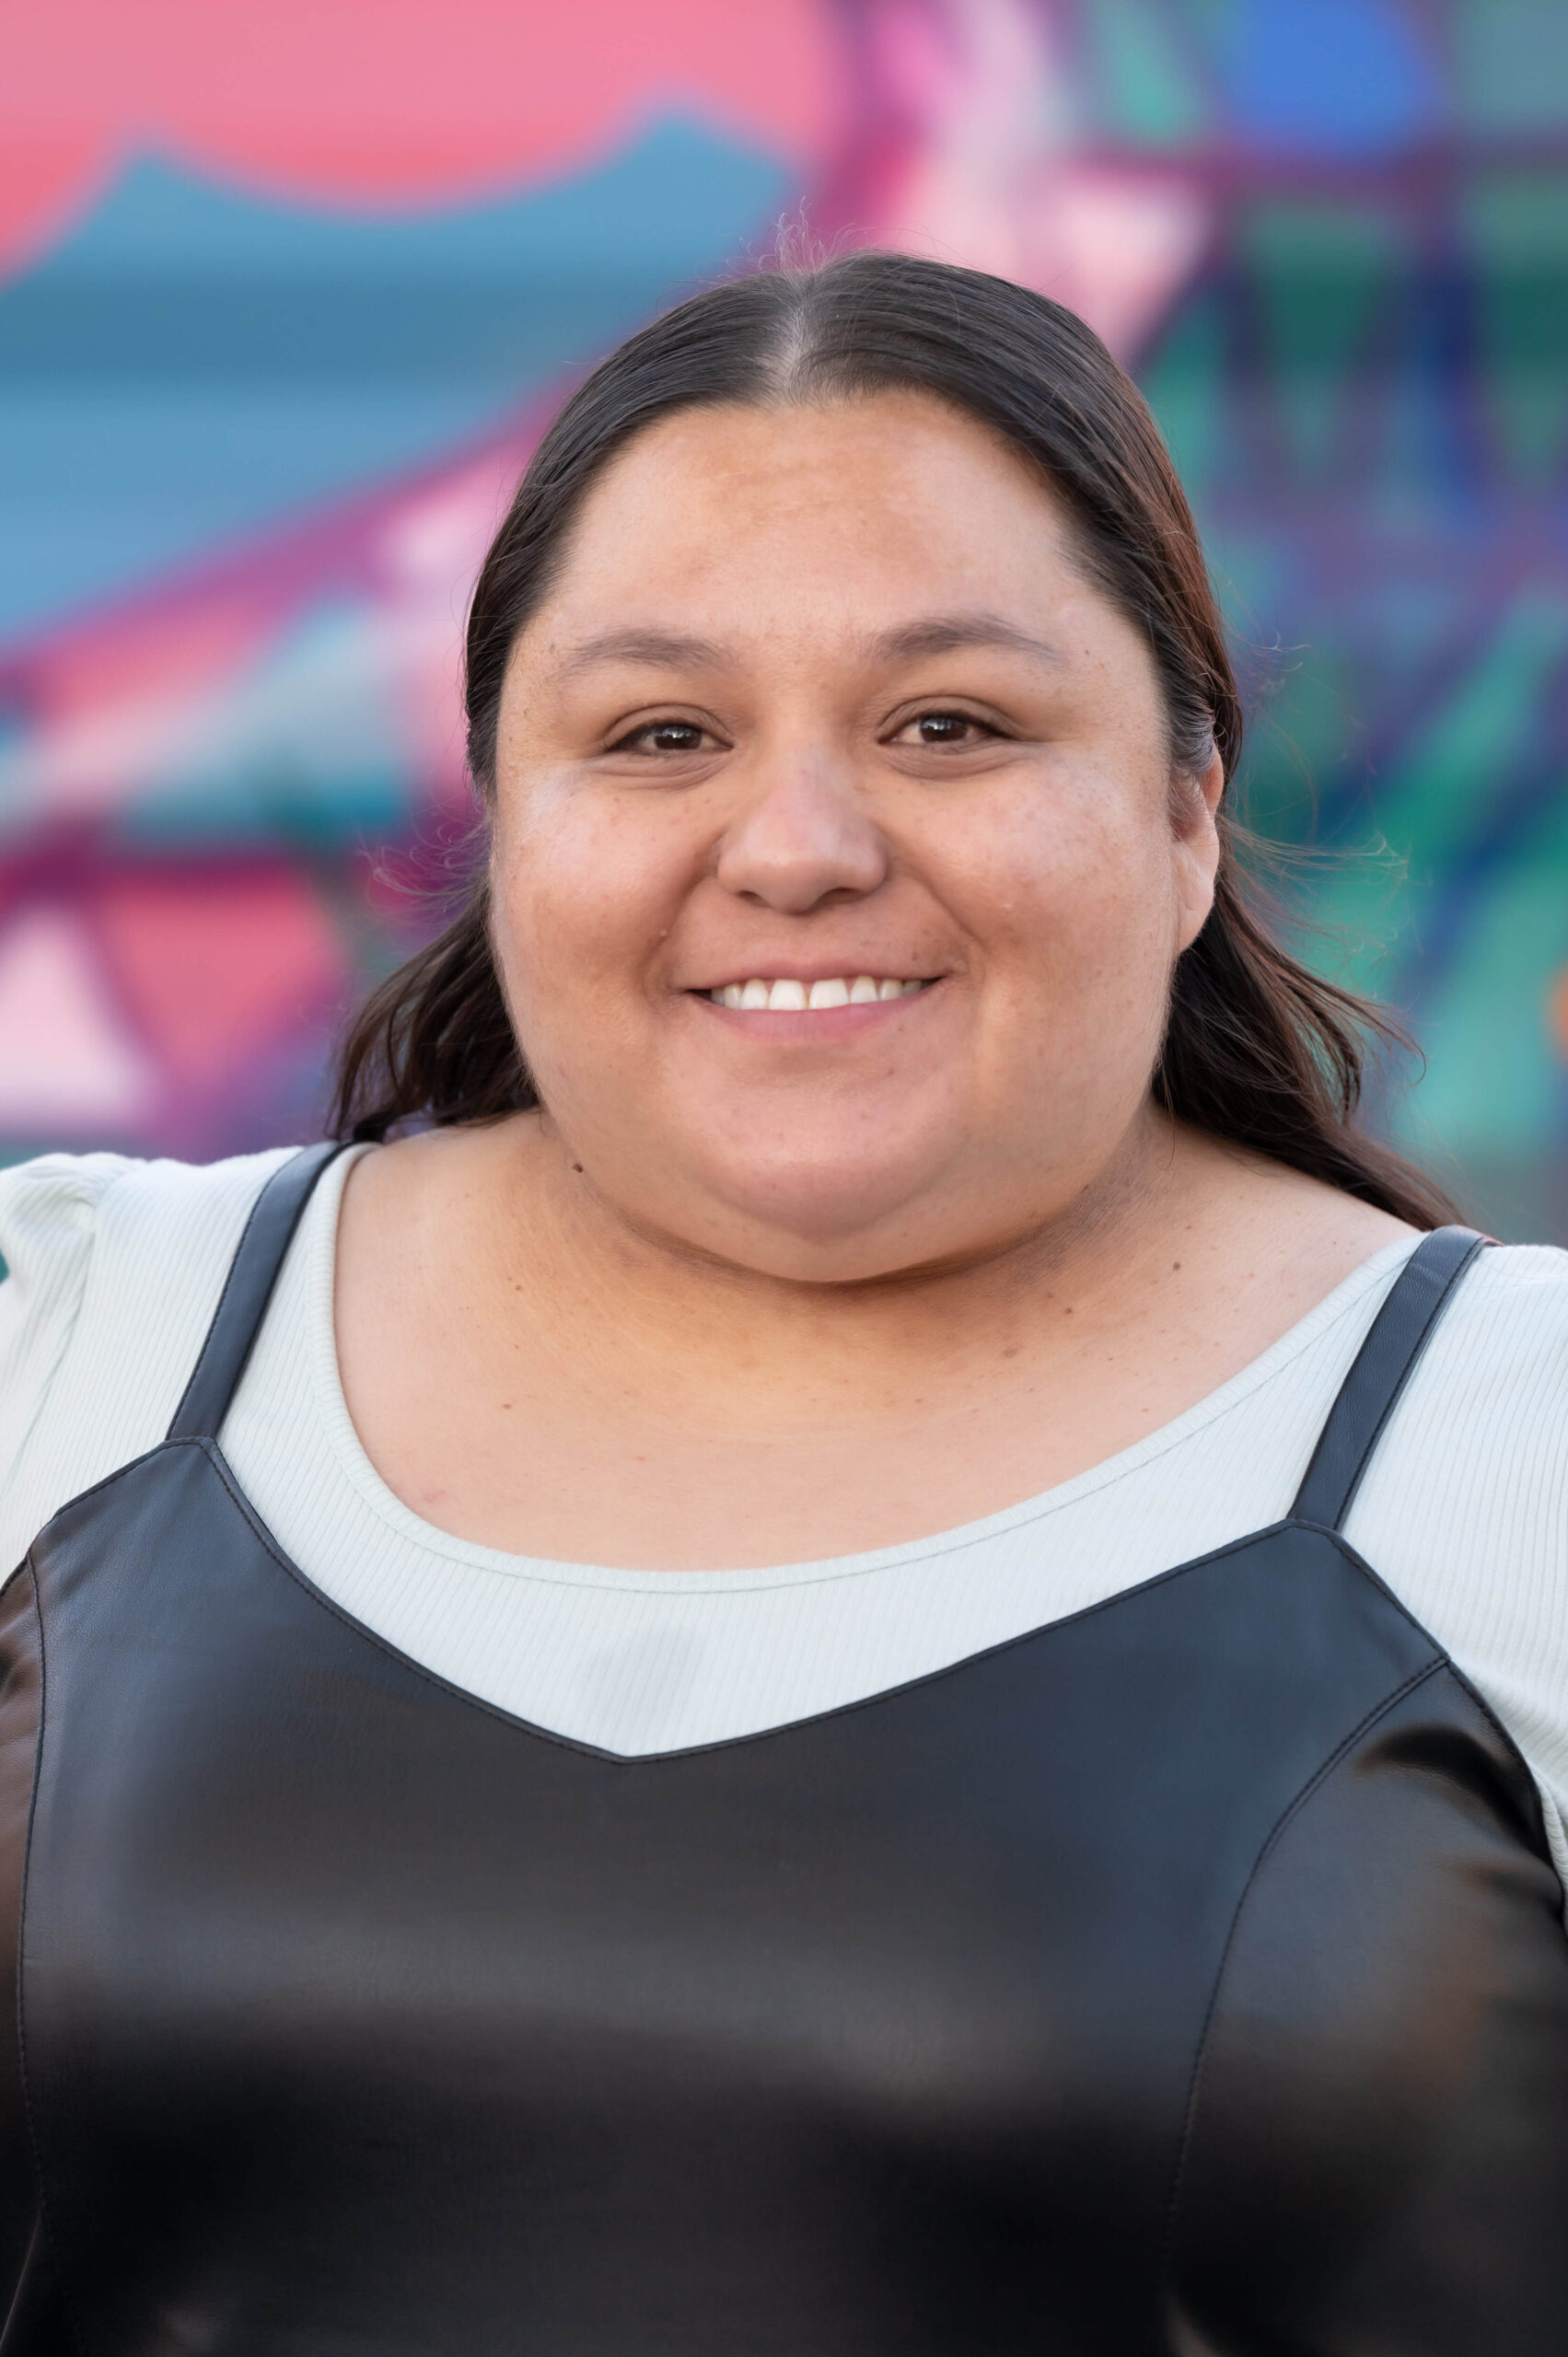 Dolores Tejada smiles for a headshot. They are a nonbinary person with their long brown hair pulled back off of their face. They are wearing a black strappy top over a white t-shirt.